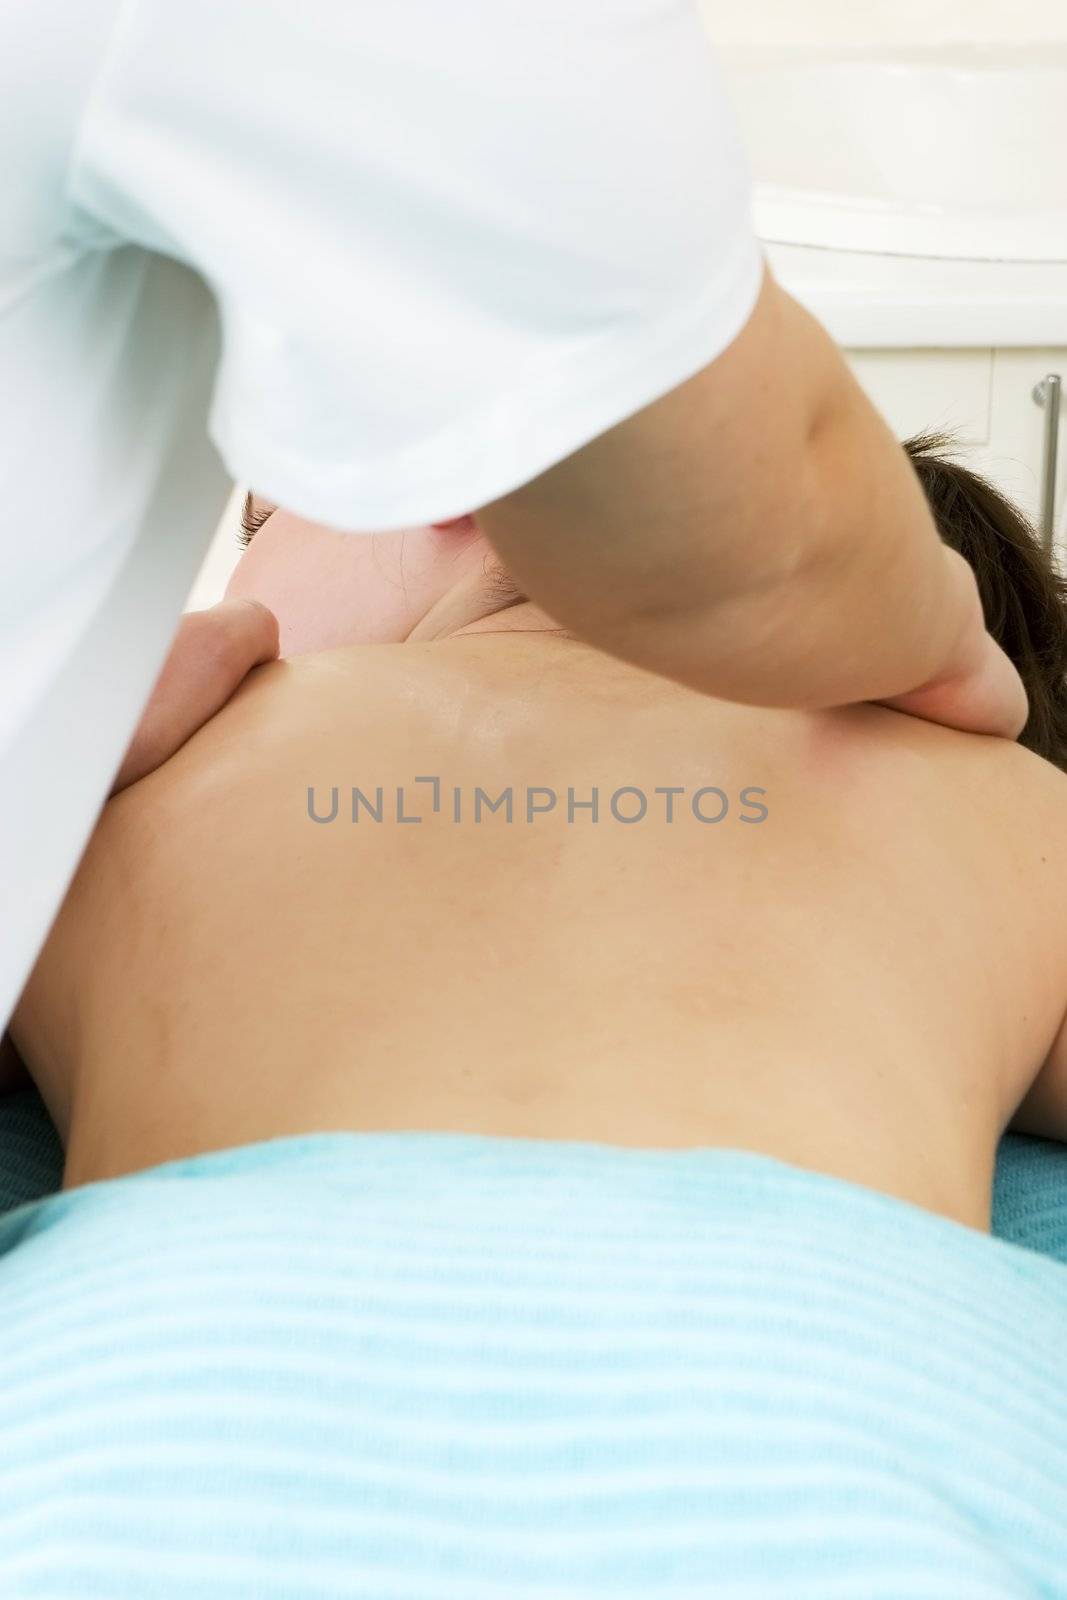 Back massage detail at a day spa.